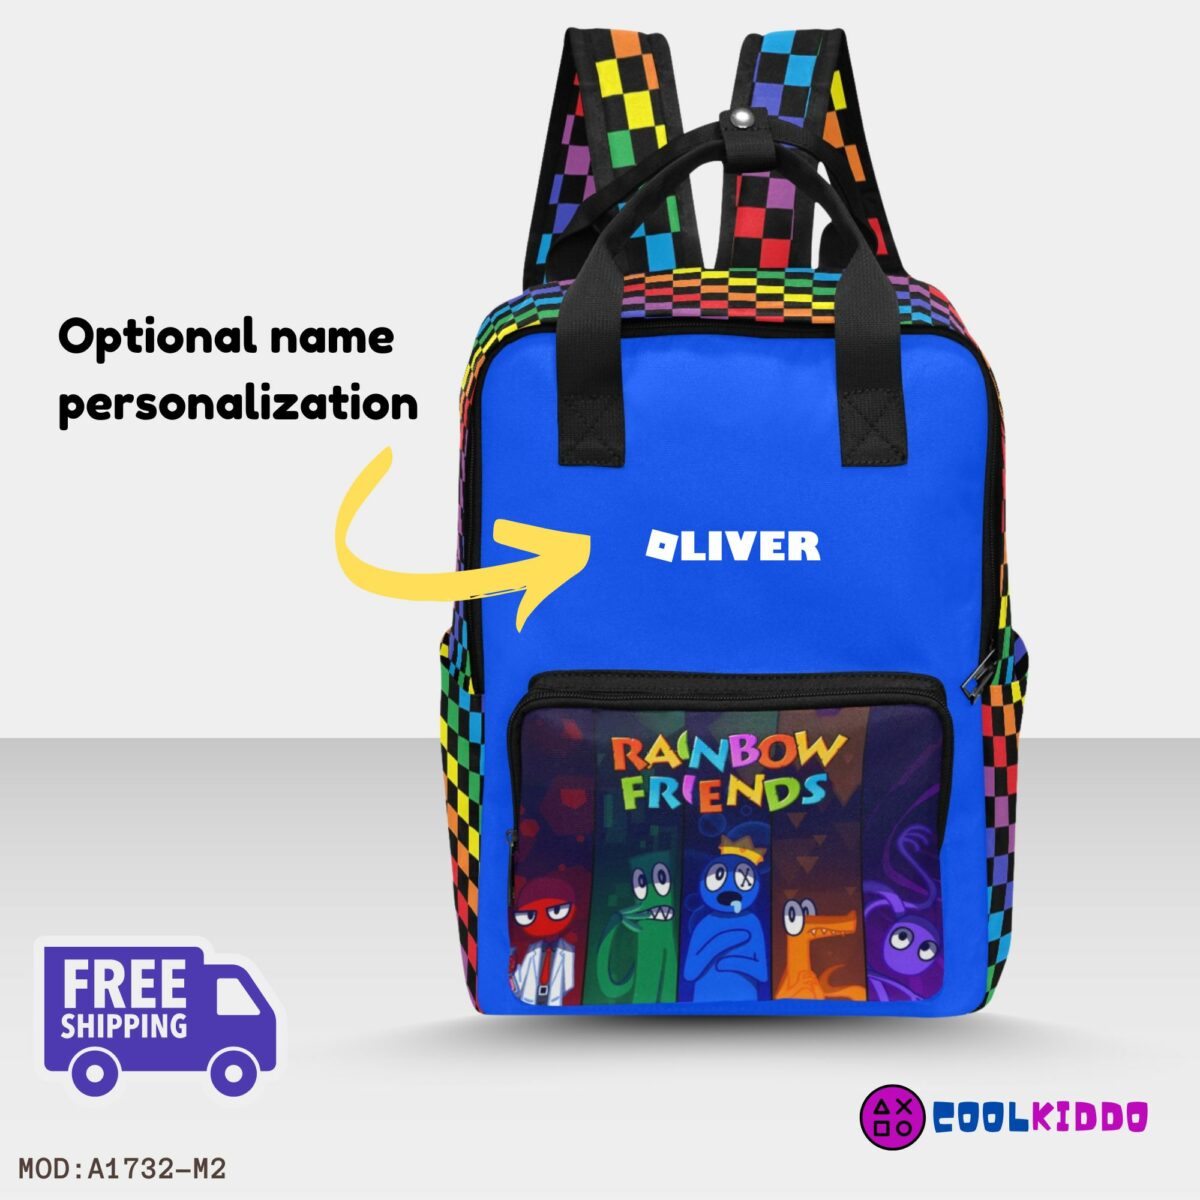 Blue Rainbow Friends Twin Handle Backpack – Name Personalization Optional Cool Kiddo 12